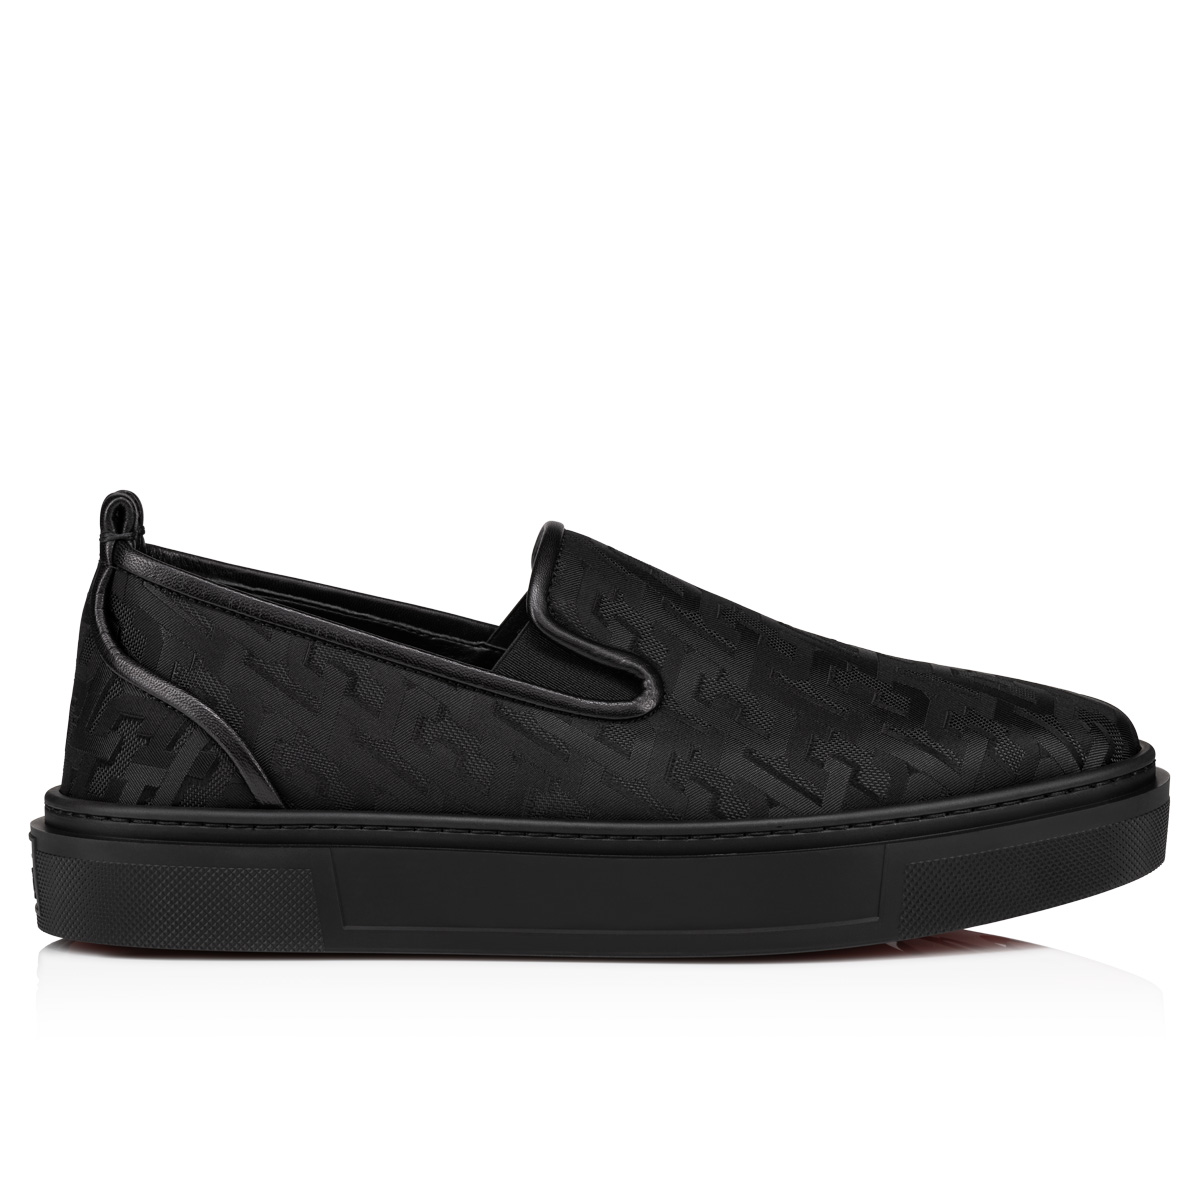 Louis Vuitton Black Monogram Fabric and Suede Slip on Sneakers Size 35